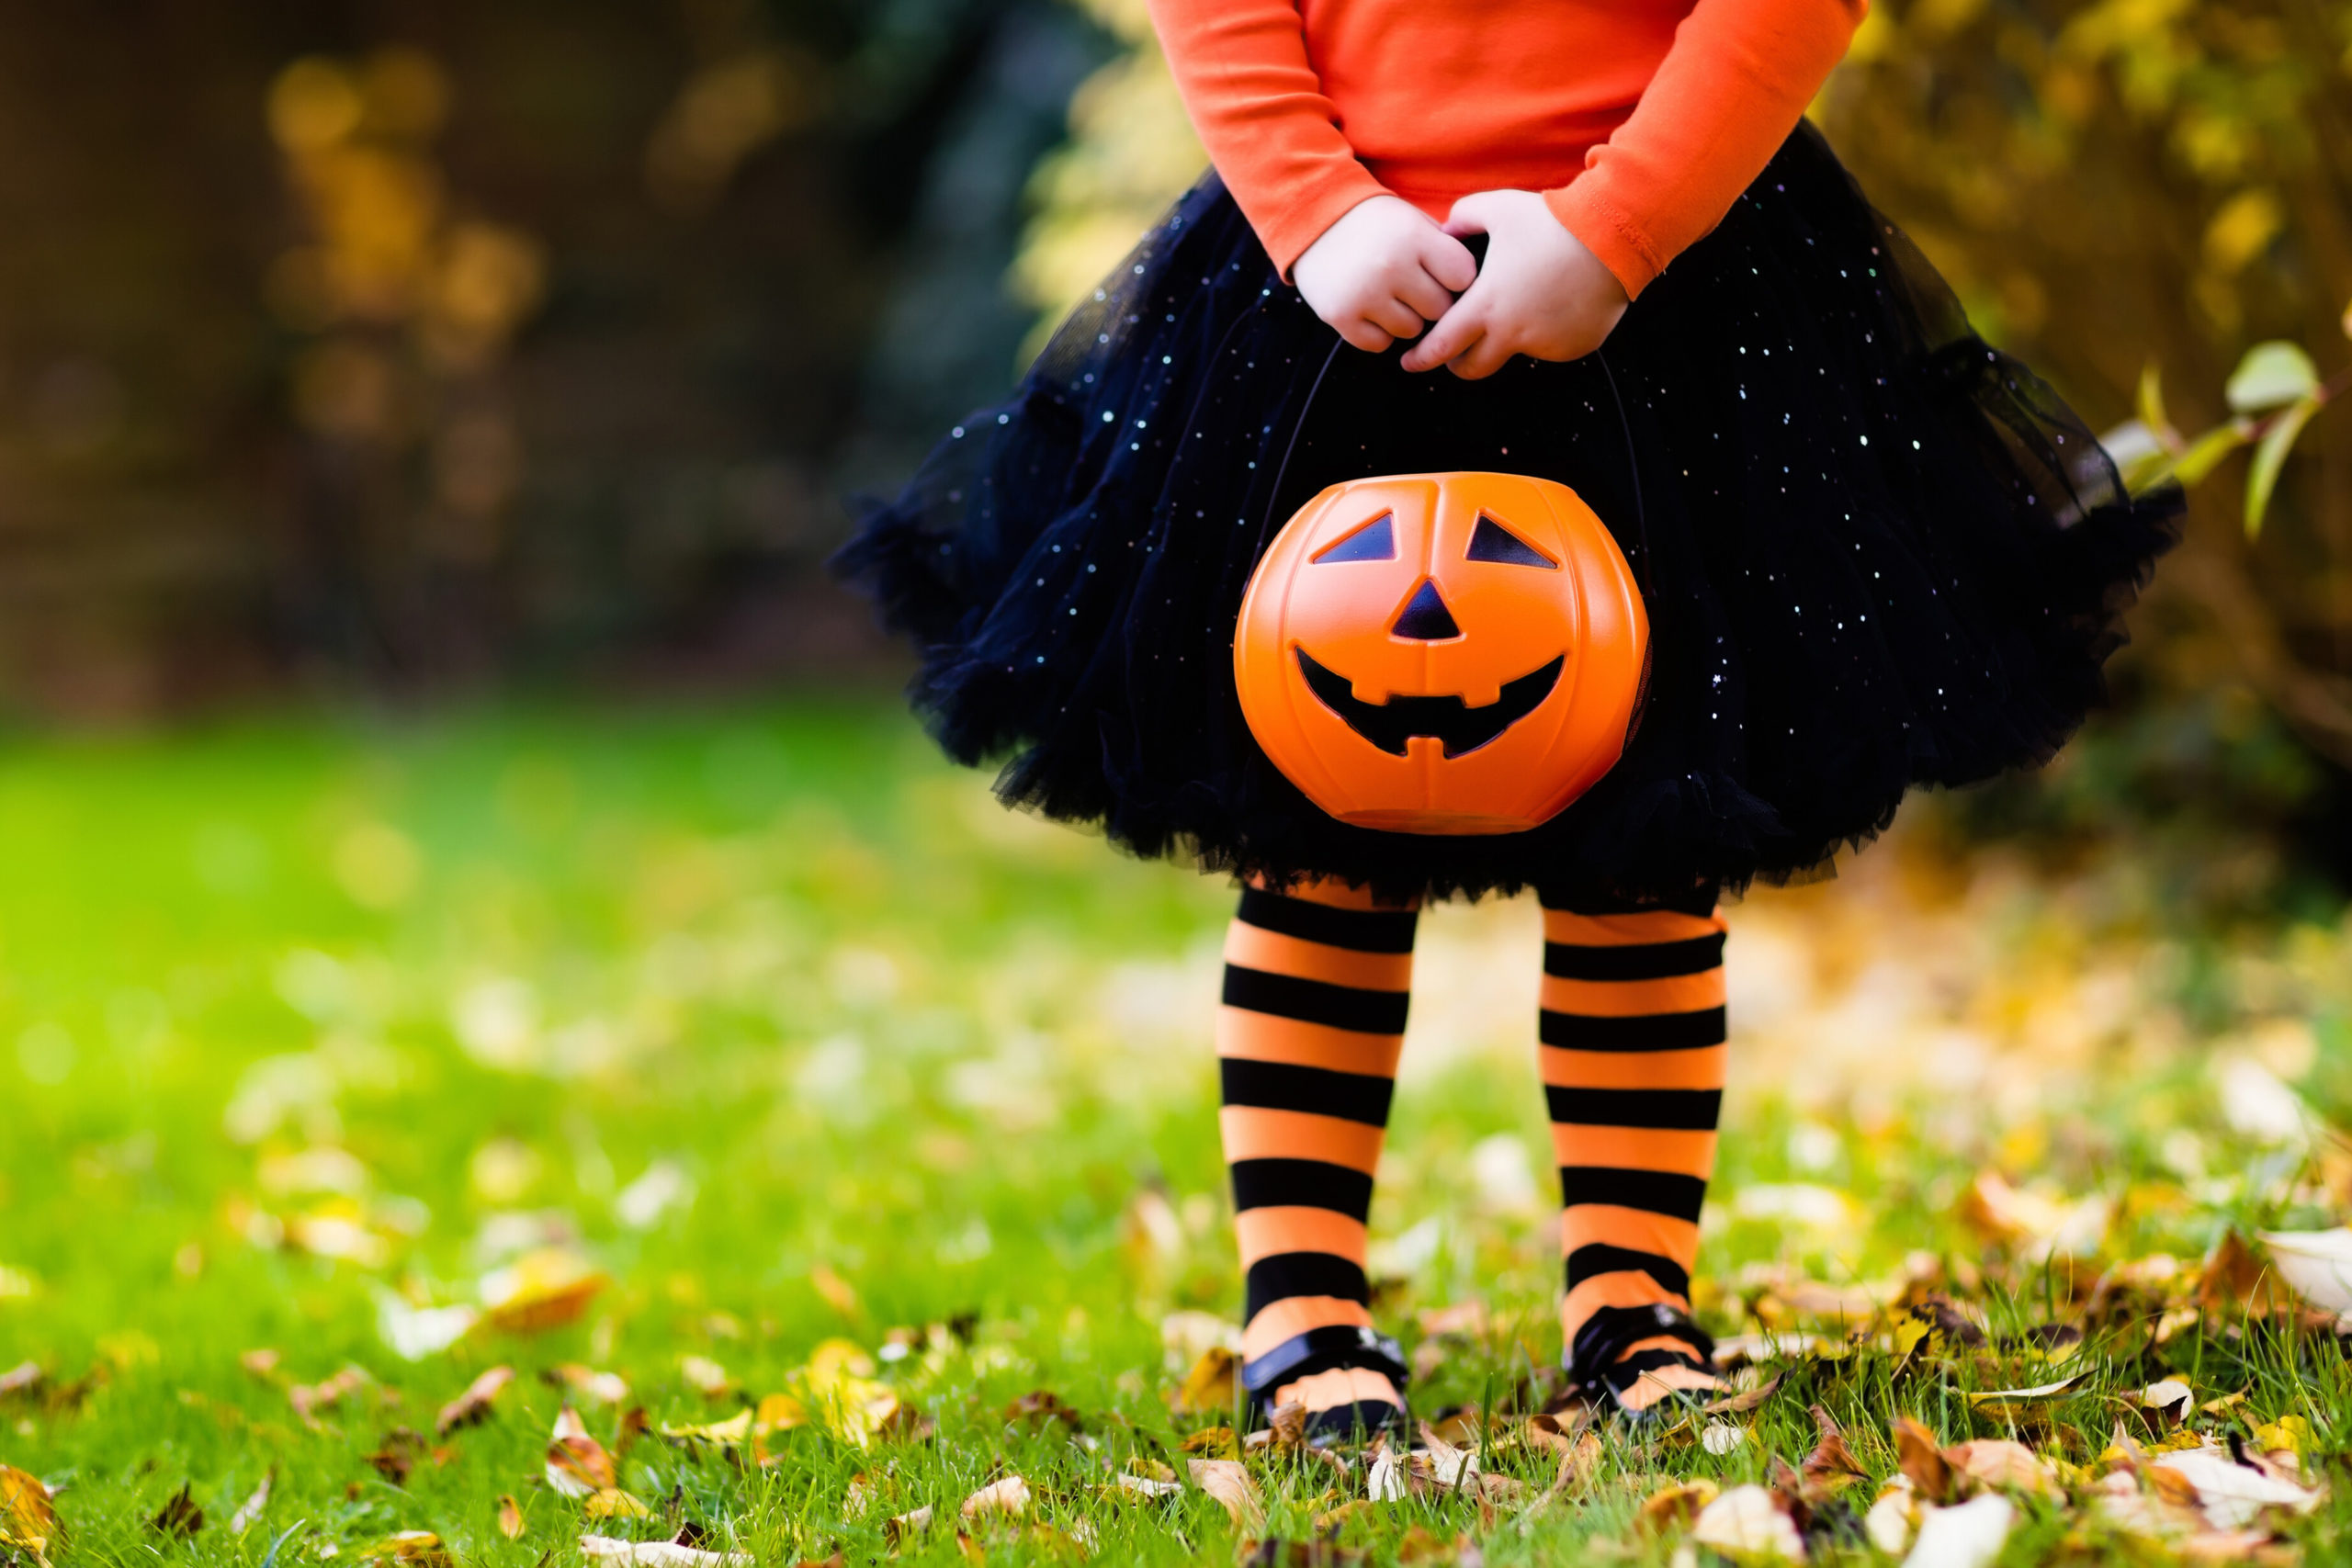 Annual Halloween kids parade coming to Clinton